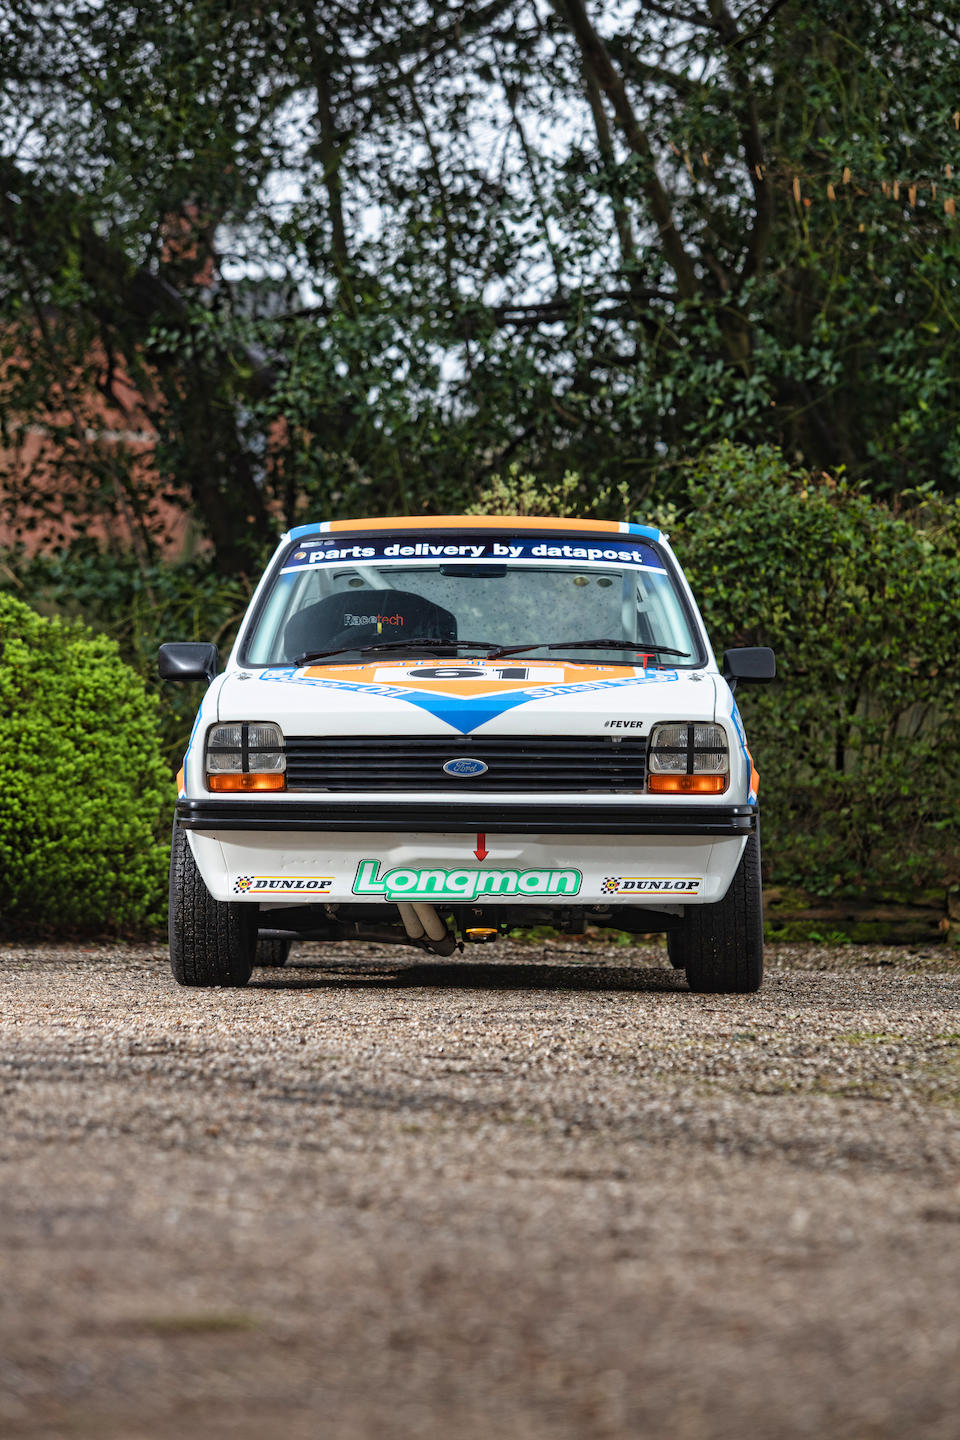 1983 Ford Fiesta 1300 Group 1 Saloon  Chassis no. VS63XXWPFBCU79326